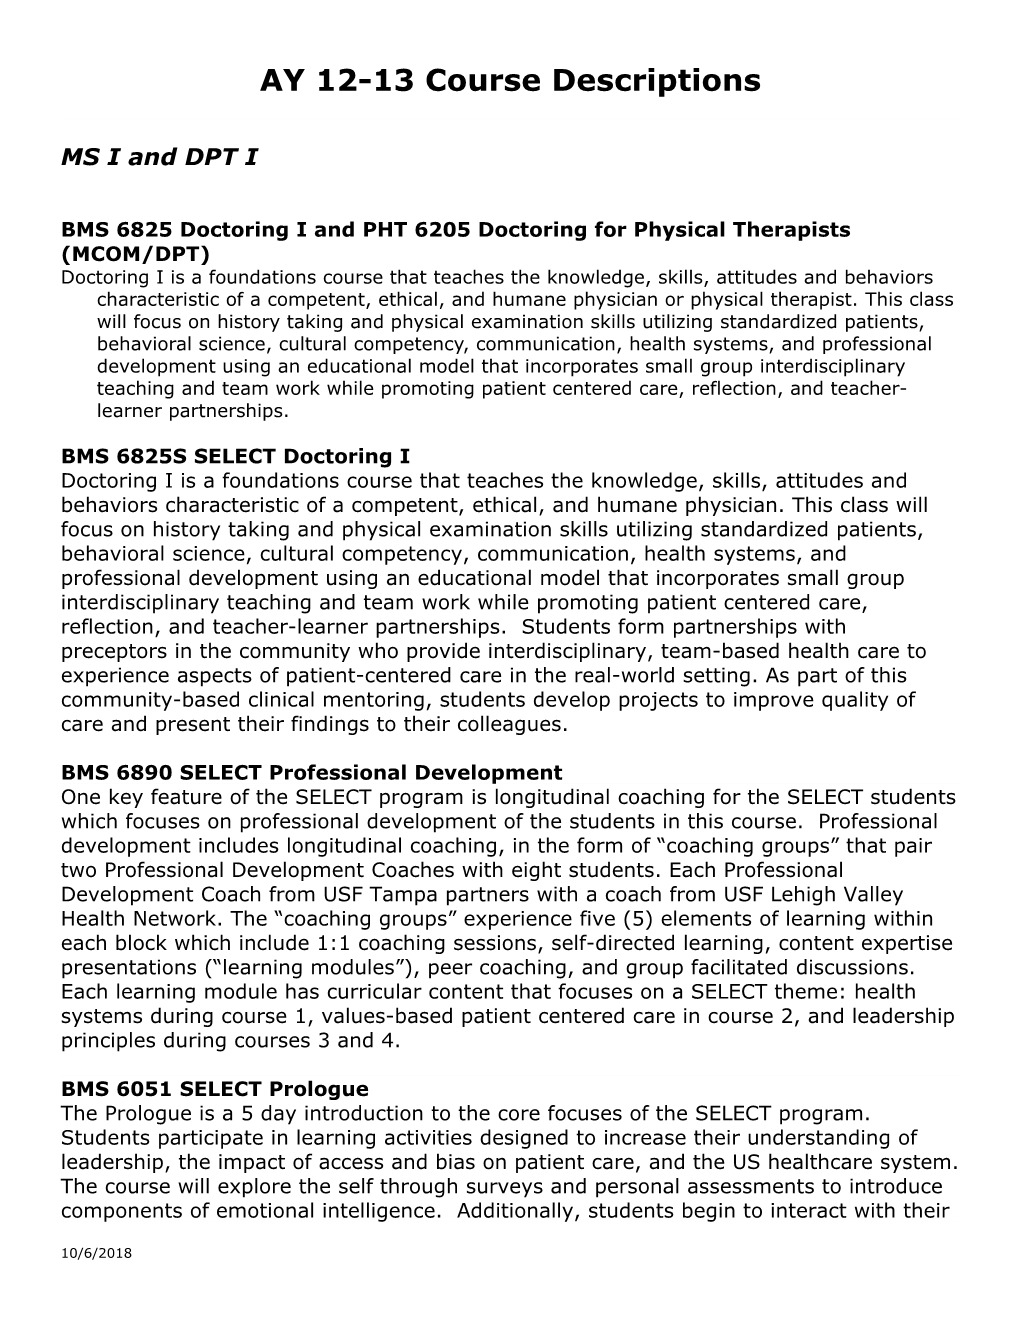 BMS 6825 Doctoring I and PHT 6205 Doctoring for Physical Therapists (MCOM/DPT)